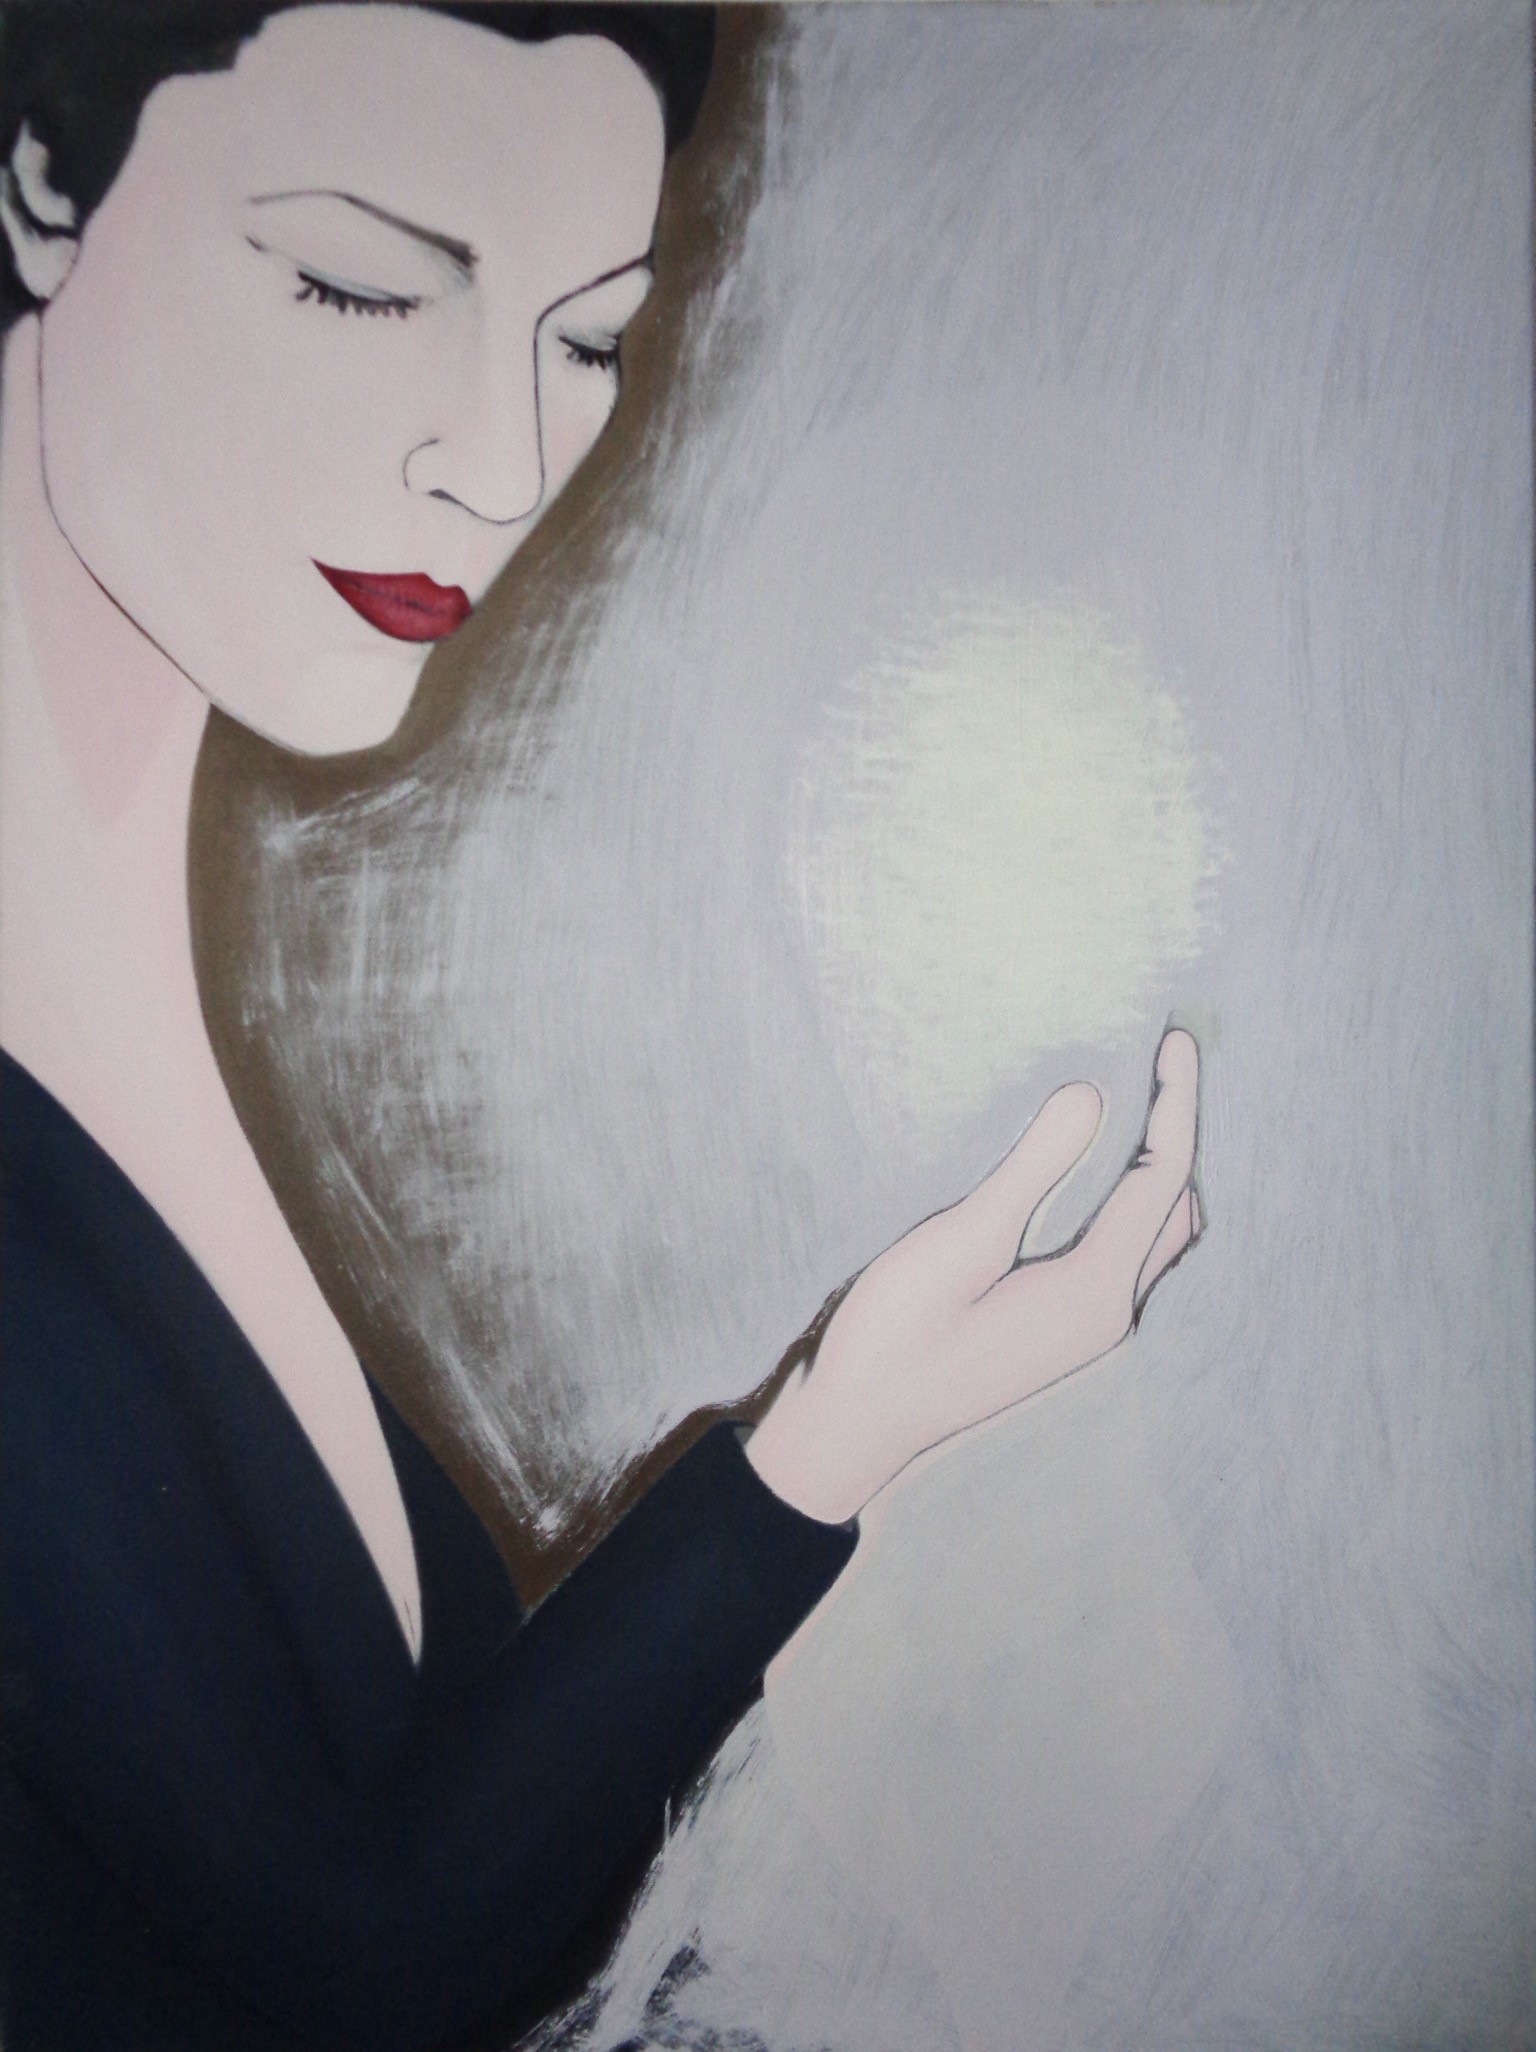 We will take care of our soul (huile sur toile 60x80)